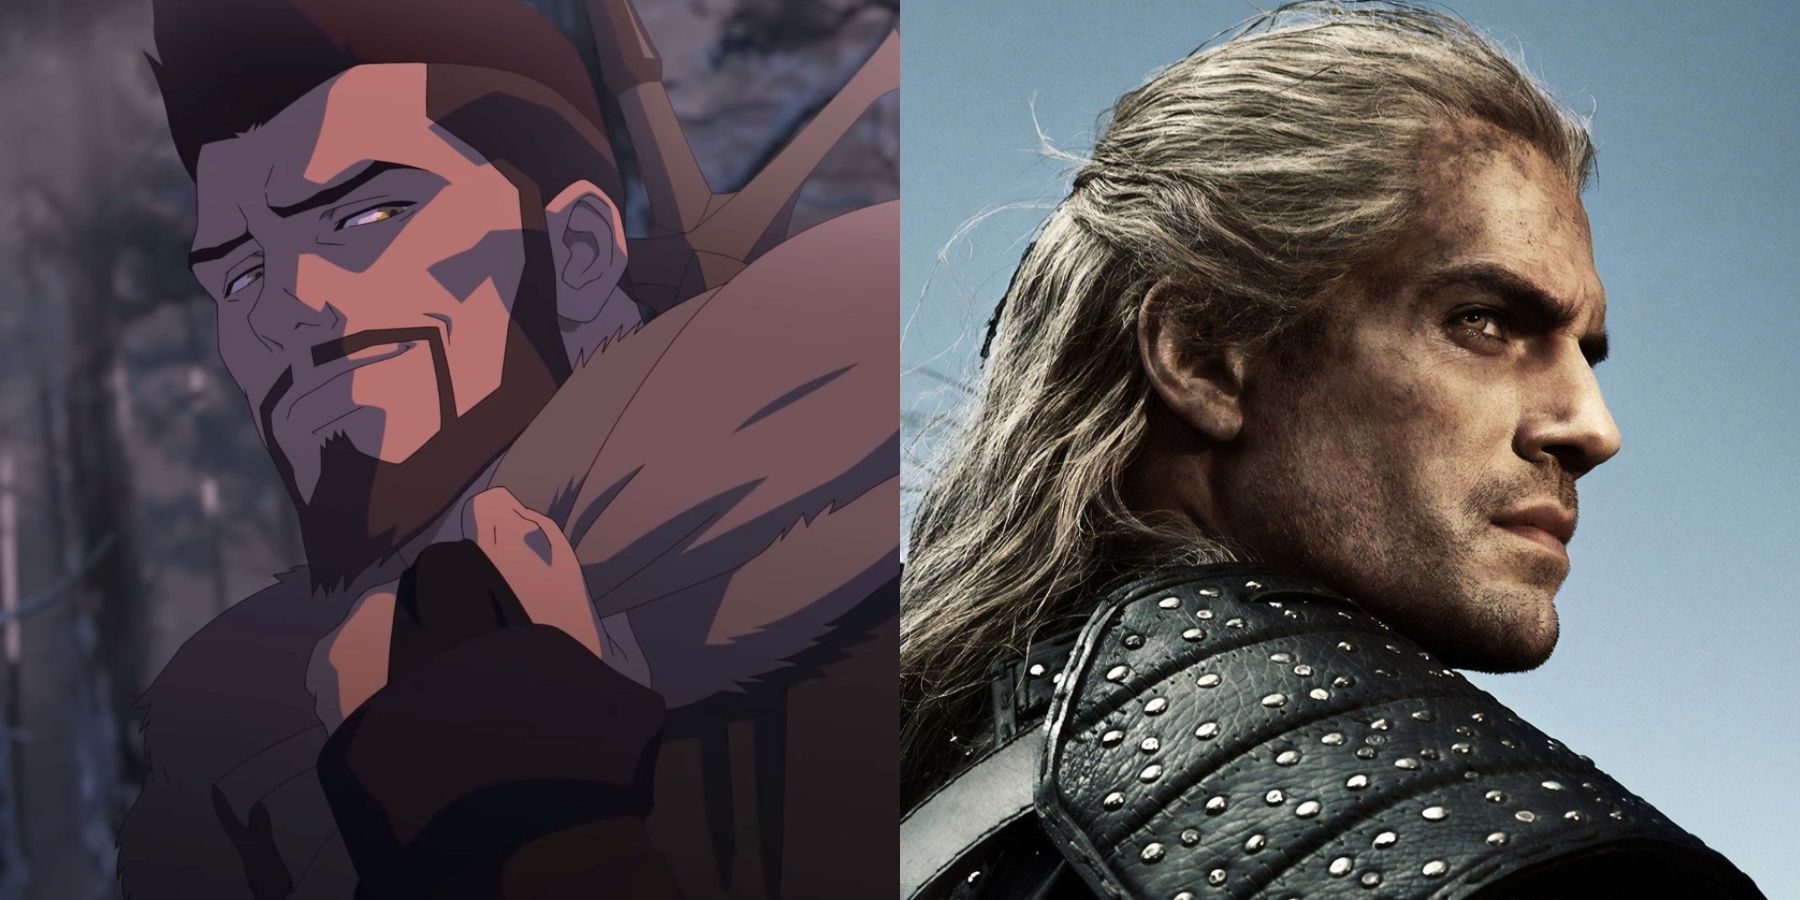 The Witcher' Looks Amazing as a Studio Ghibli Anime